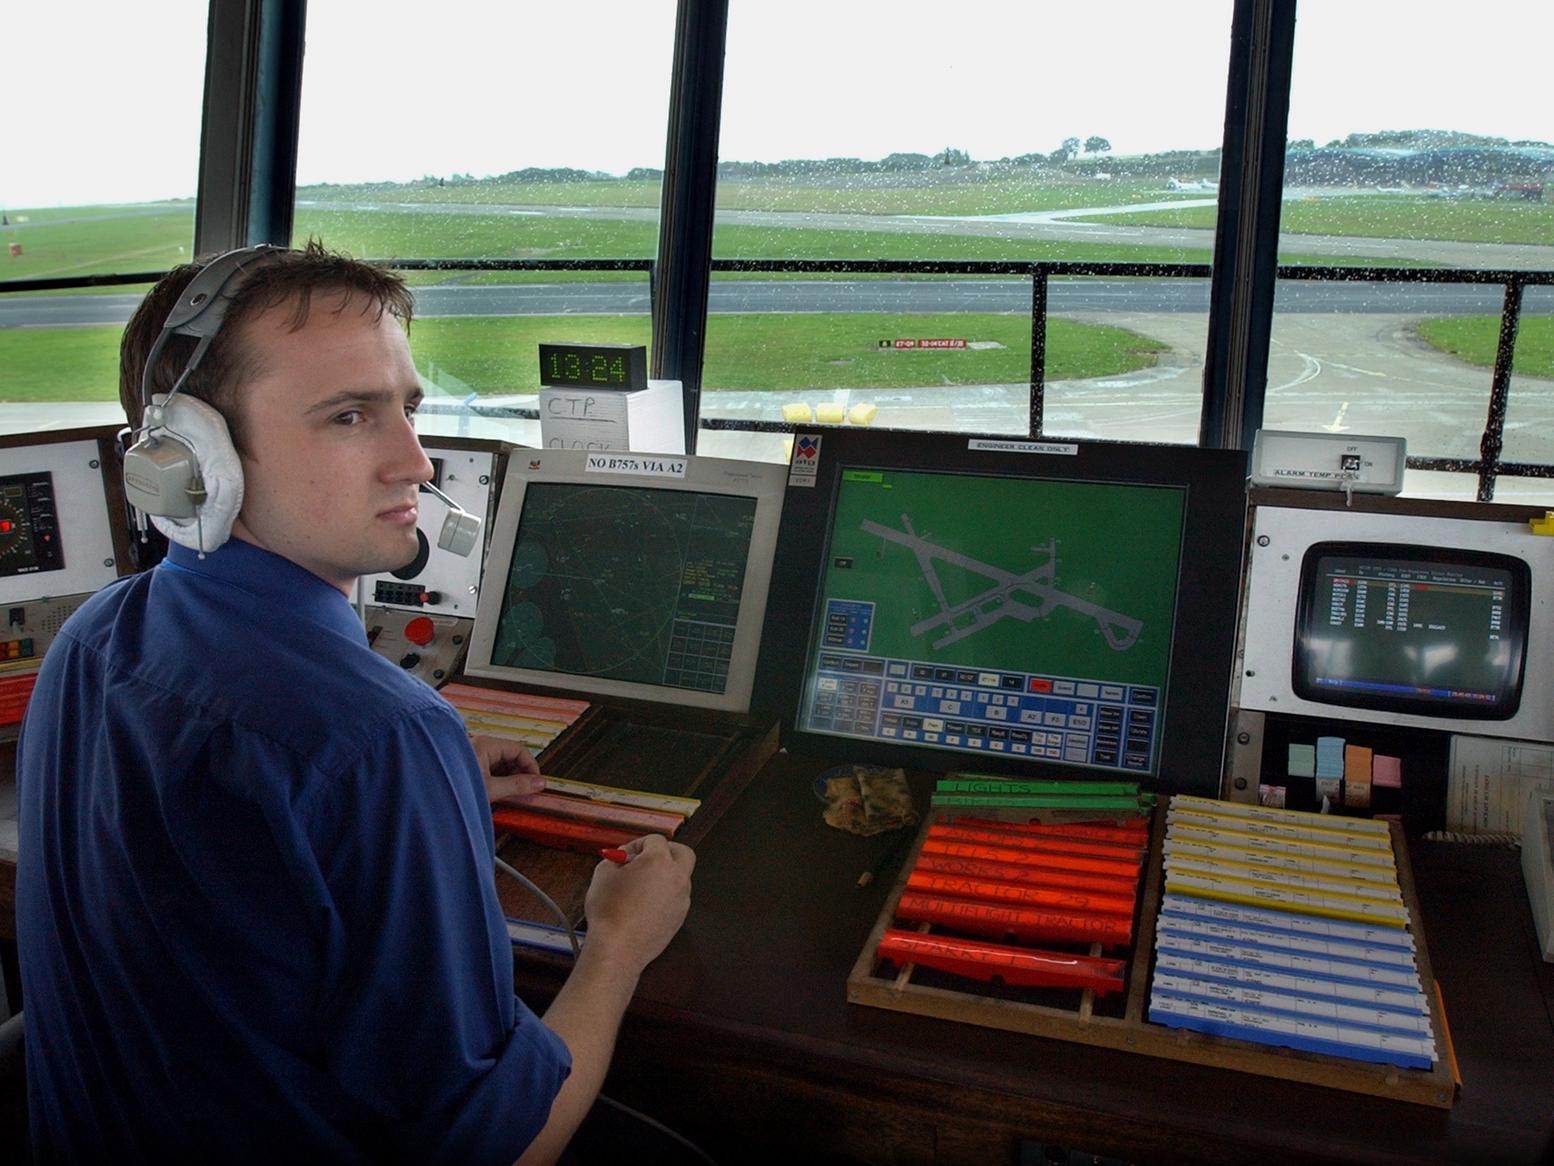 The view from the air traffic control tower.